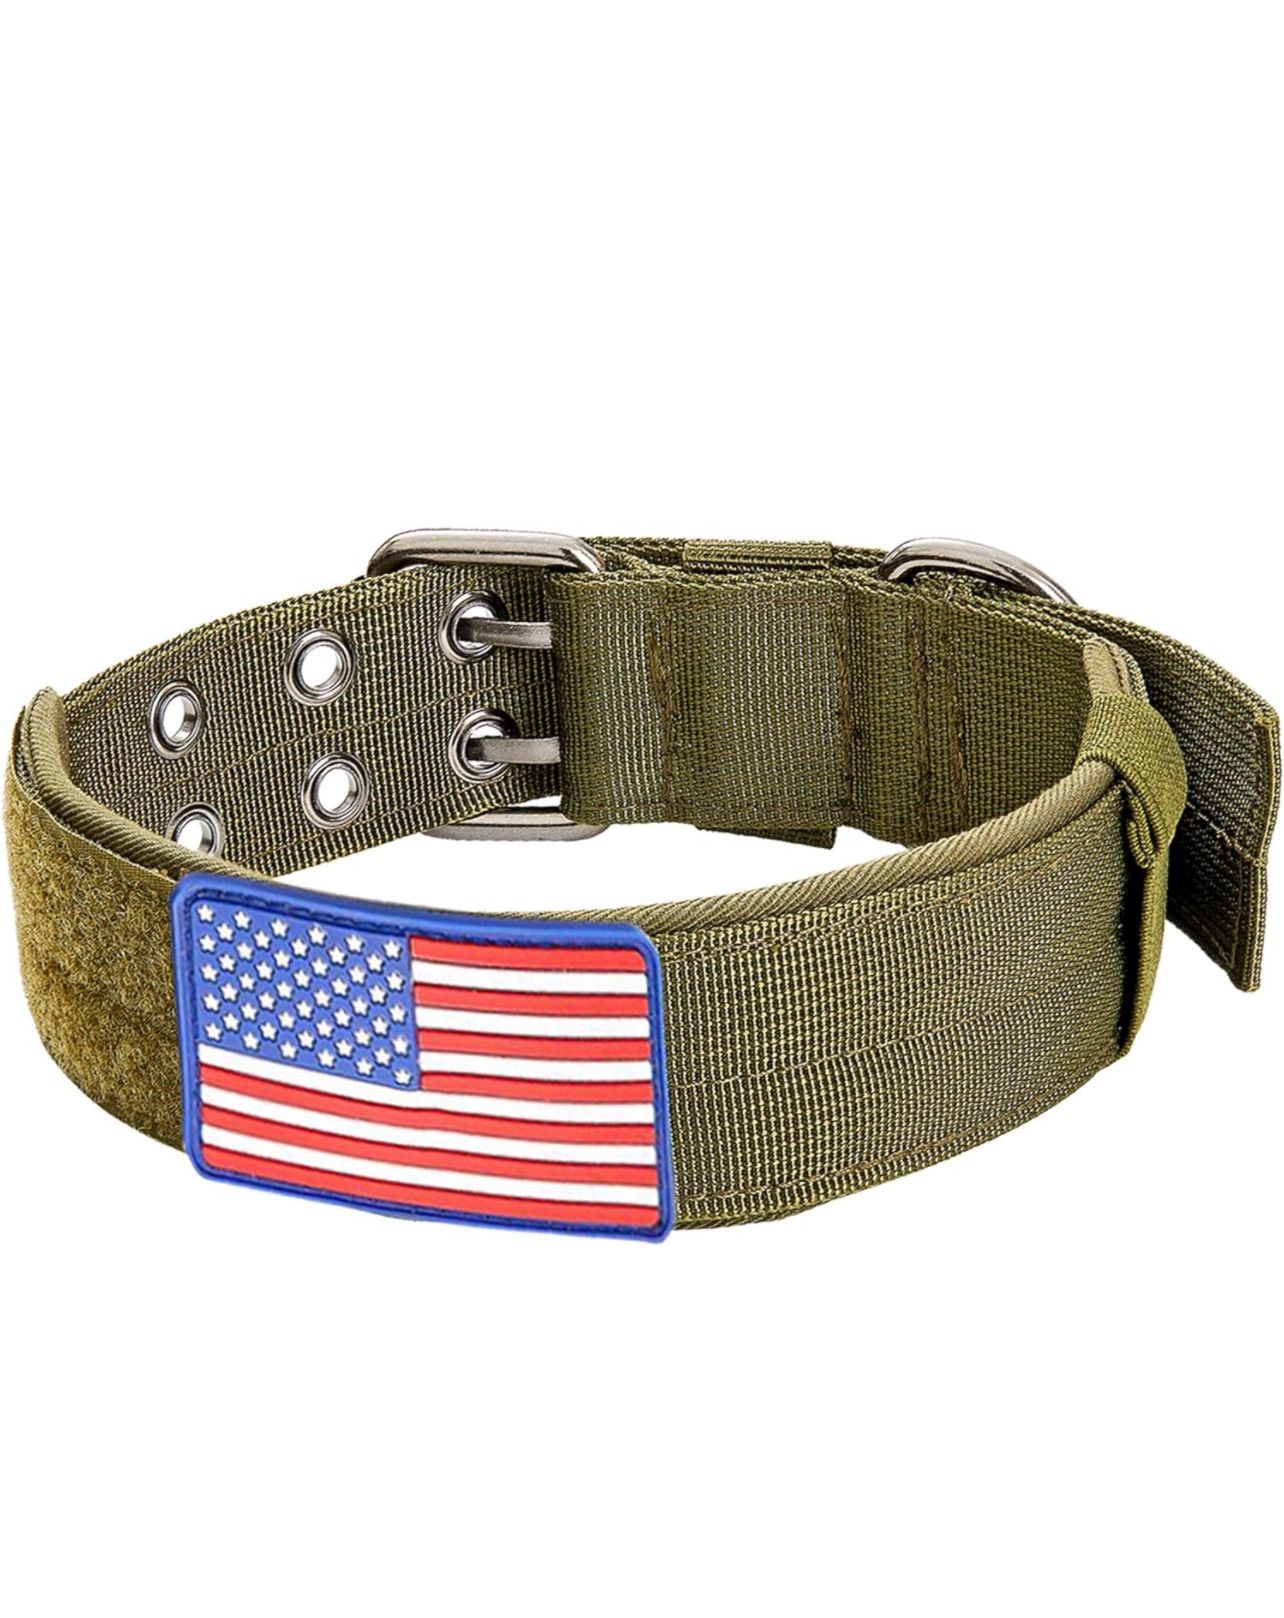 Tactical Dog Collar Adjustable with Sturdy Metal Buckle Handle (size large)